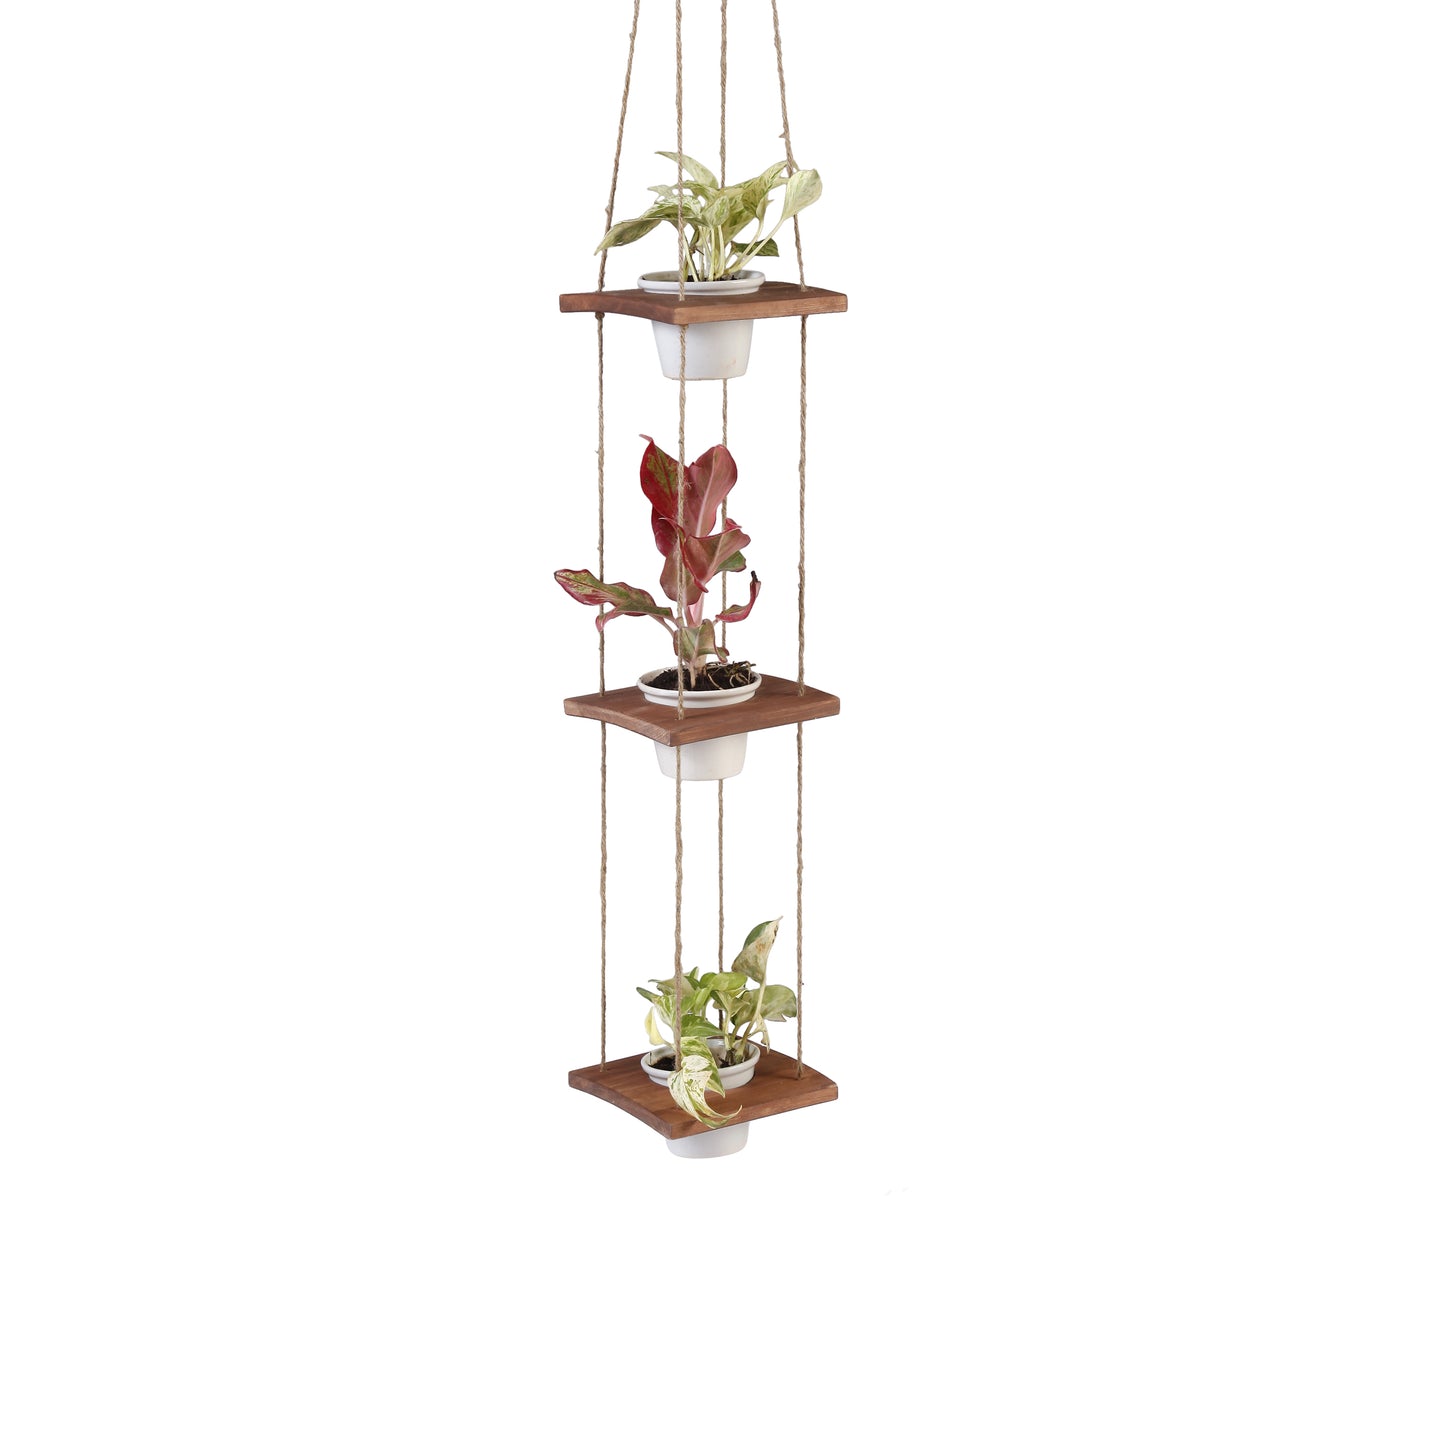 A Tiny Mistake Hanging Pinewood and Ceramic Planter Vertical, Indoor Planter for Home Decor, Wooden Planter with Three Pots (Dark)